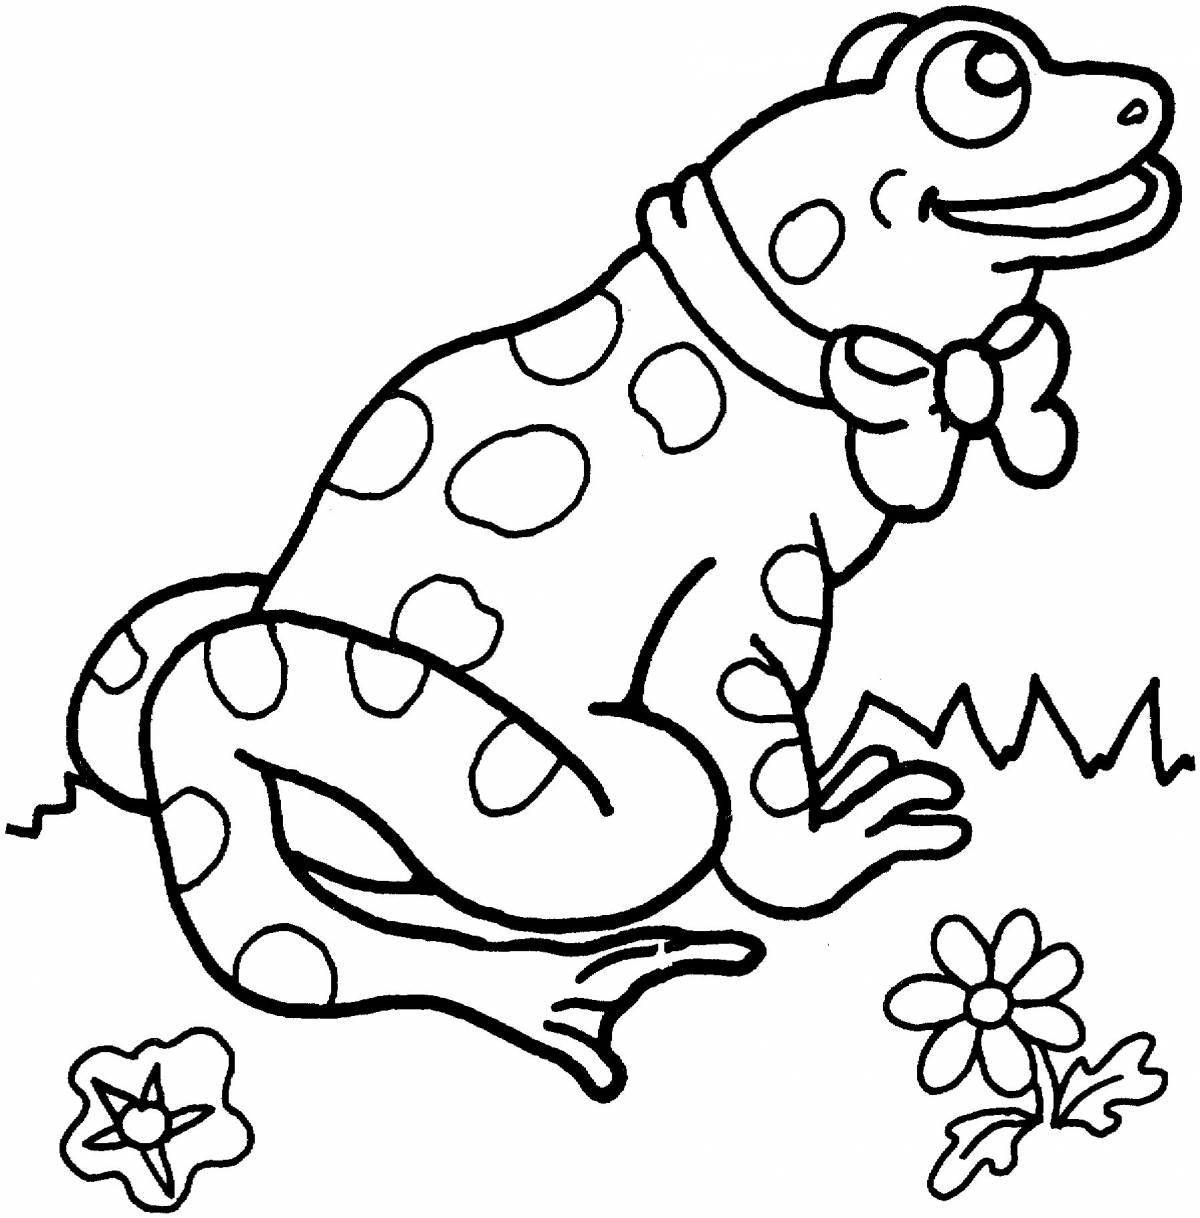 Coloring playful toad and rose